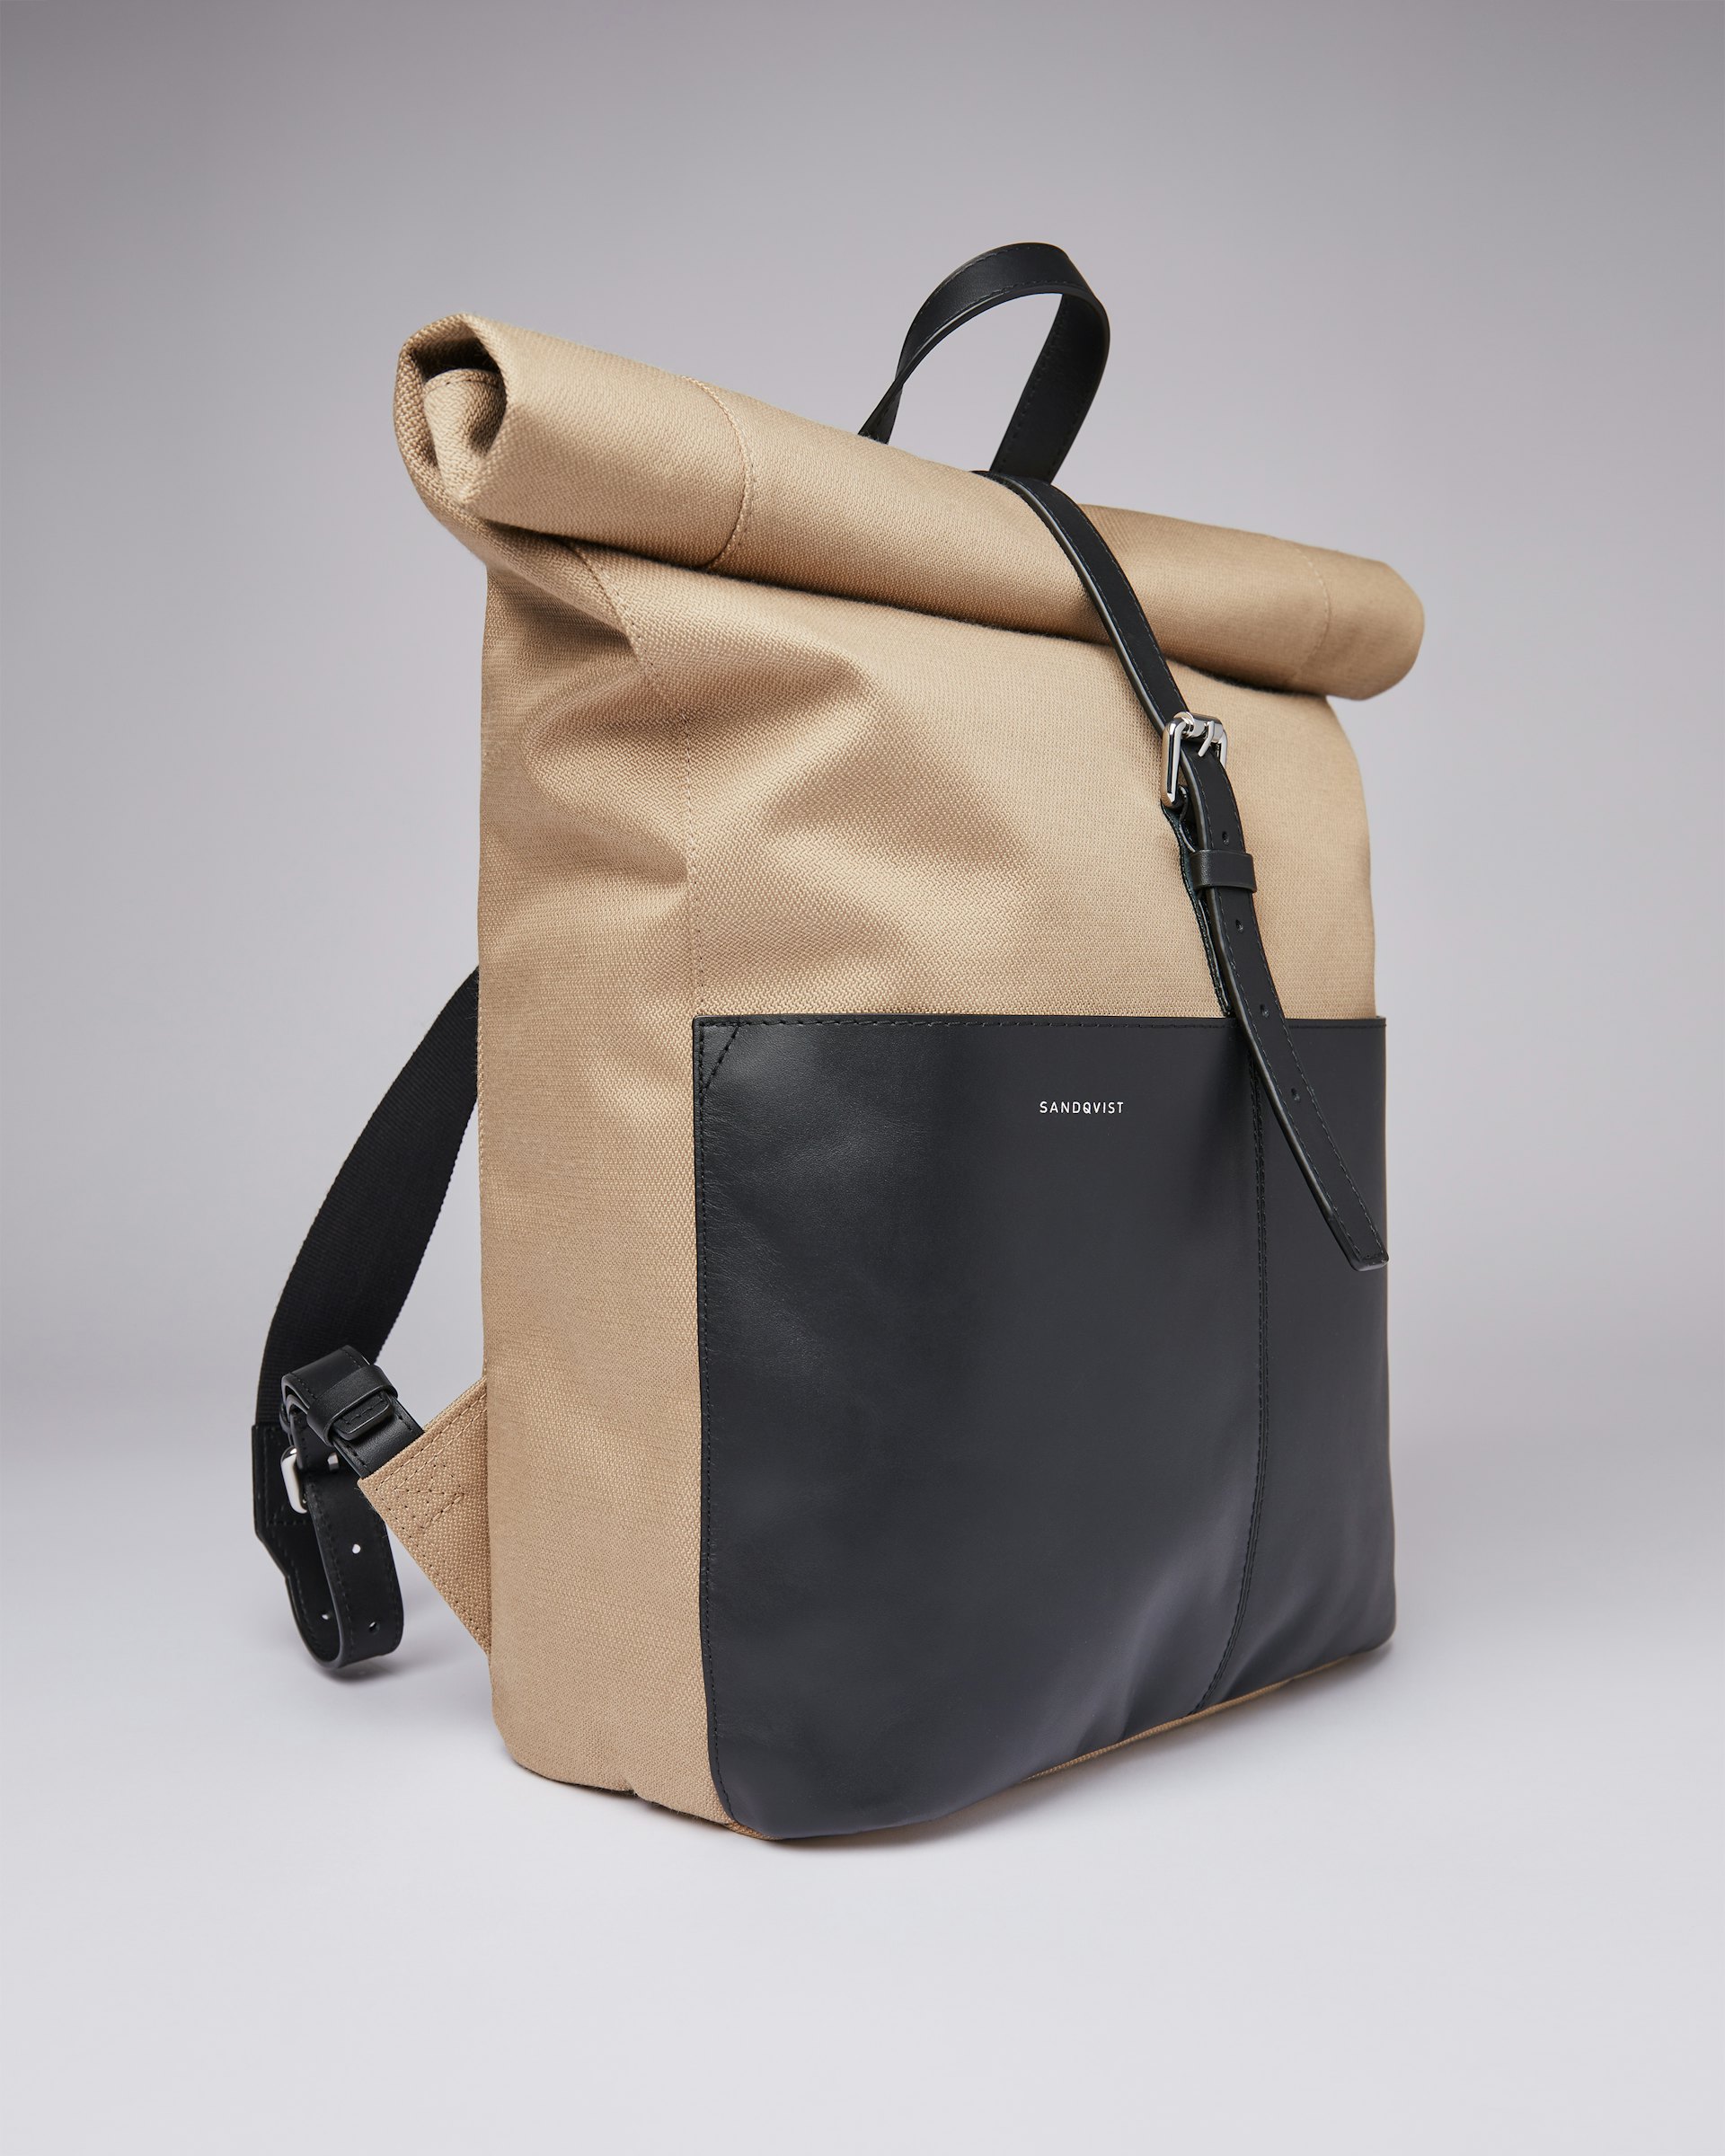 Antonia twill belongs to the category Backpacks and is in color black & beige (4 of 7)